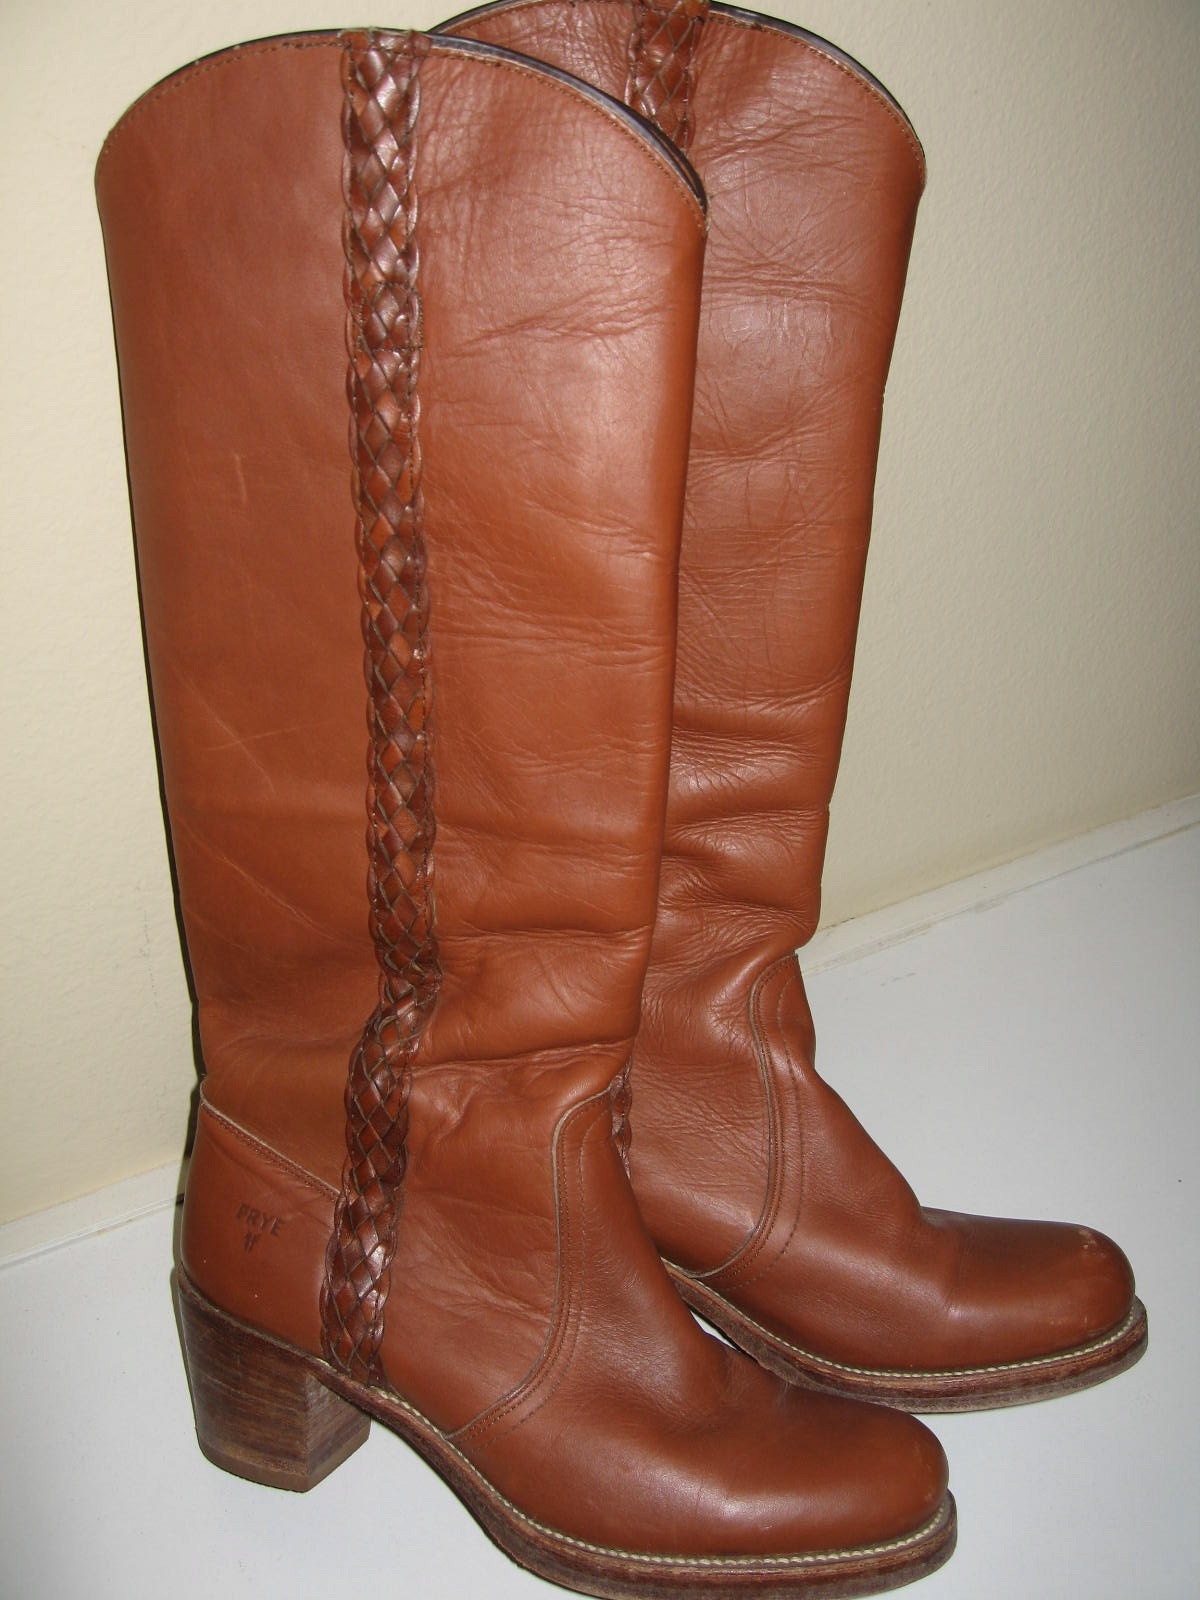 ON SALE Vintage Frye Boots 1970's Braided Leather Riding